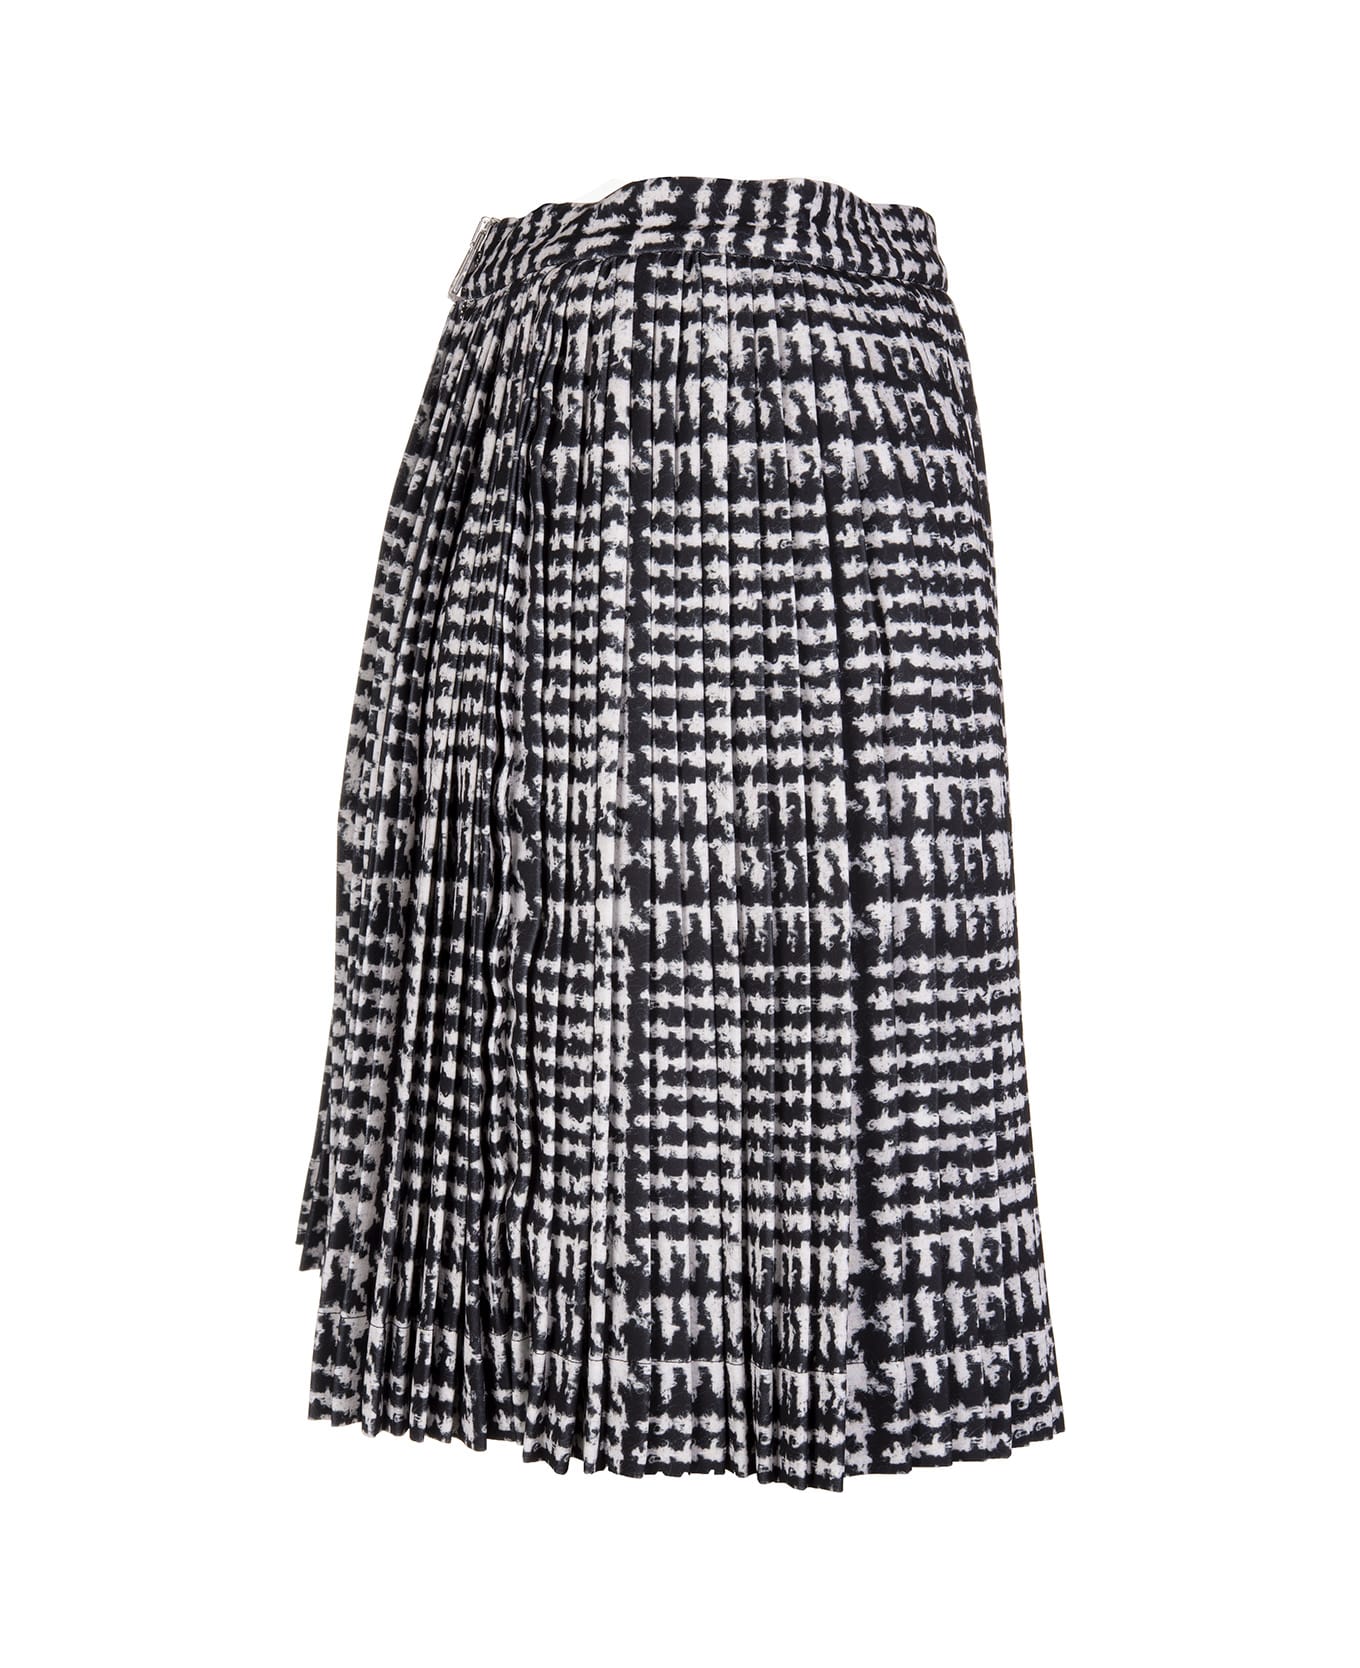 Ermanno Scervino Cady Trouser Skirt With Prince Of Wales Print - BLACK/WHITE